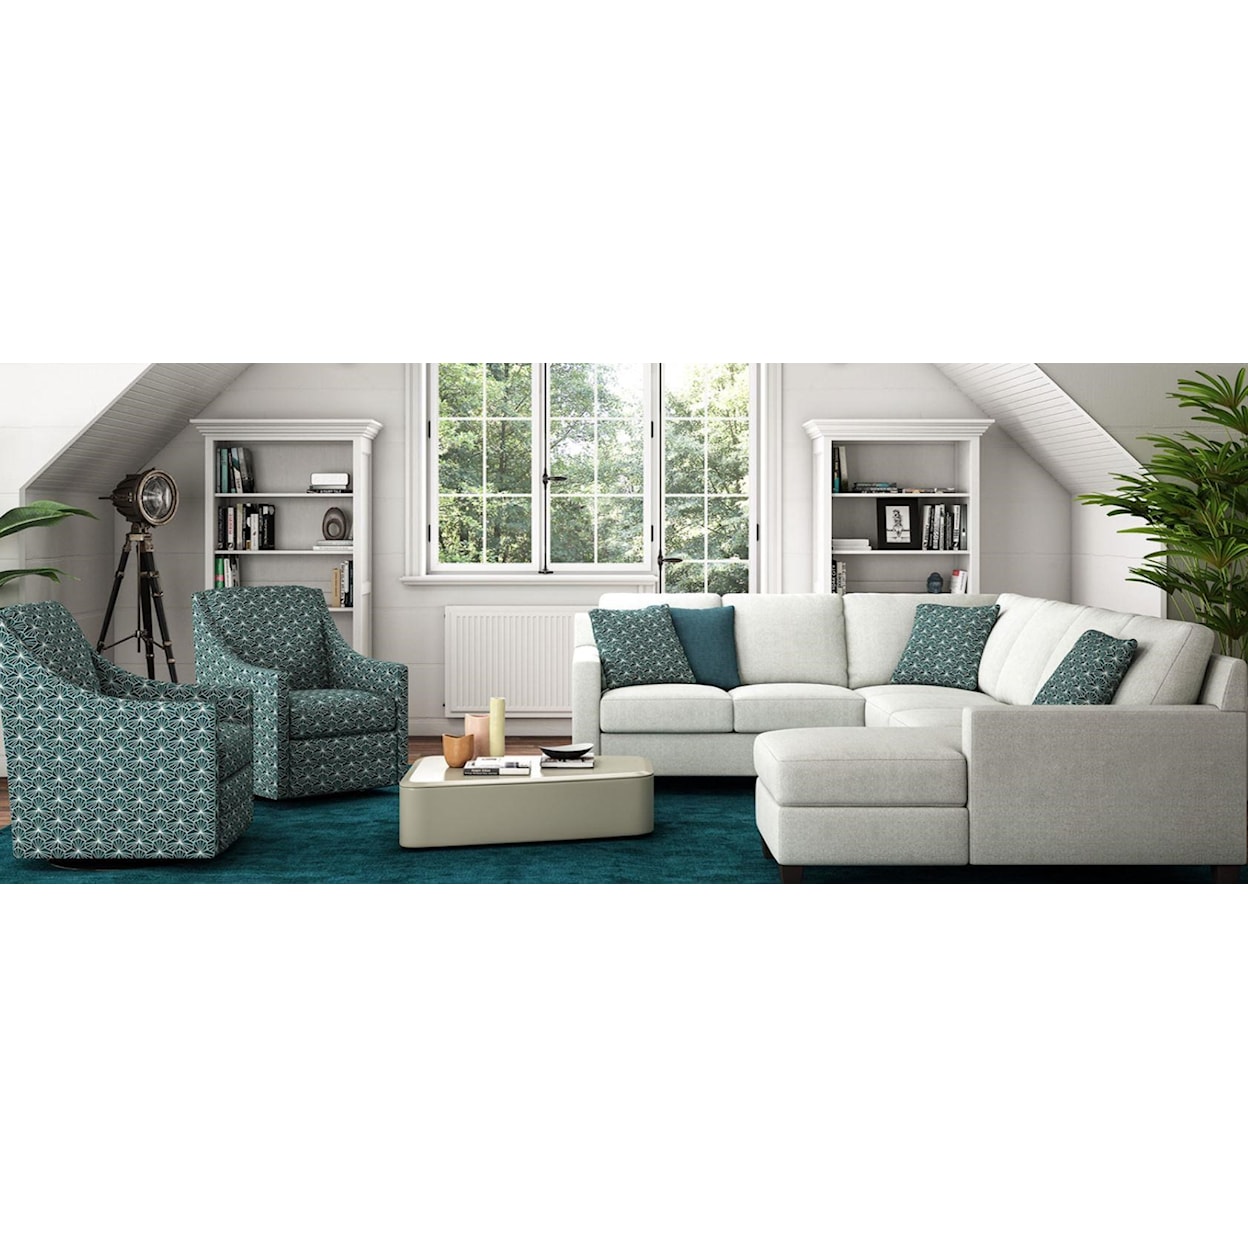 Brentwood Classics Finley 2 Piece Sectional with Chaise